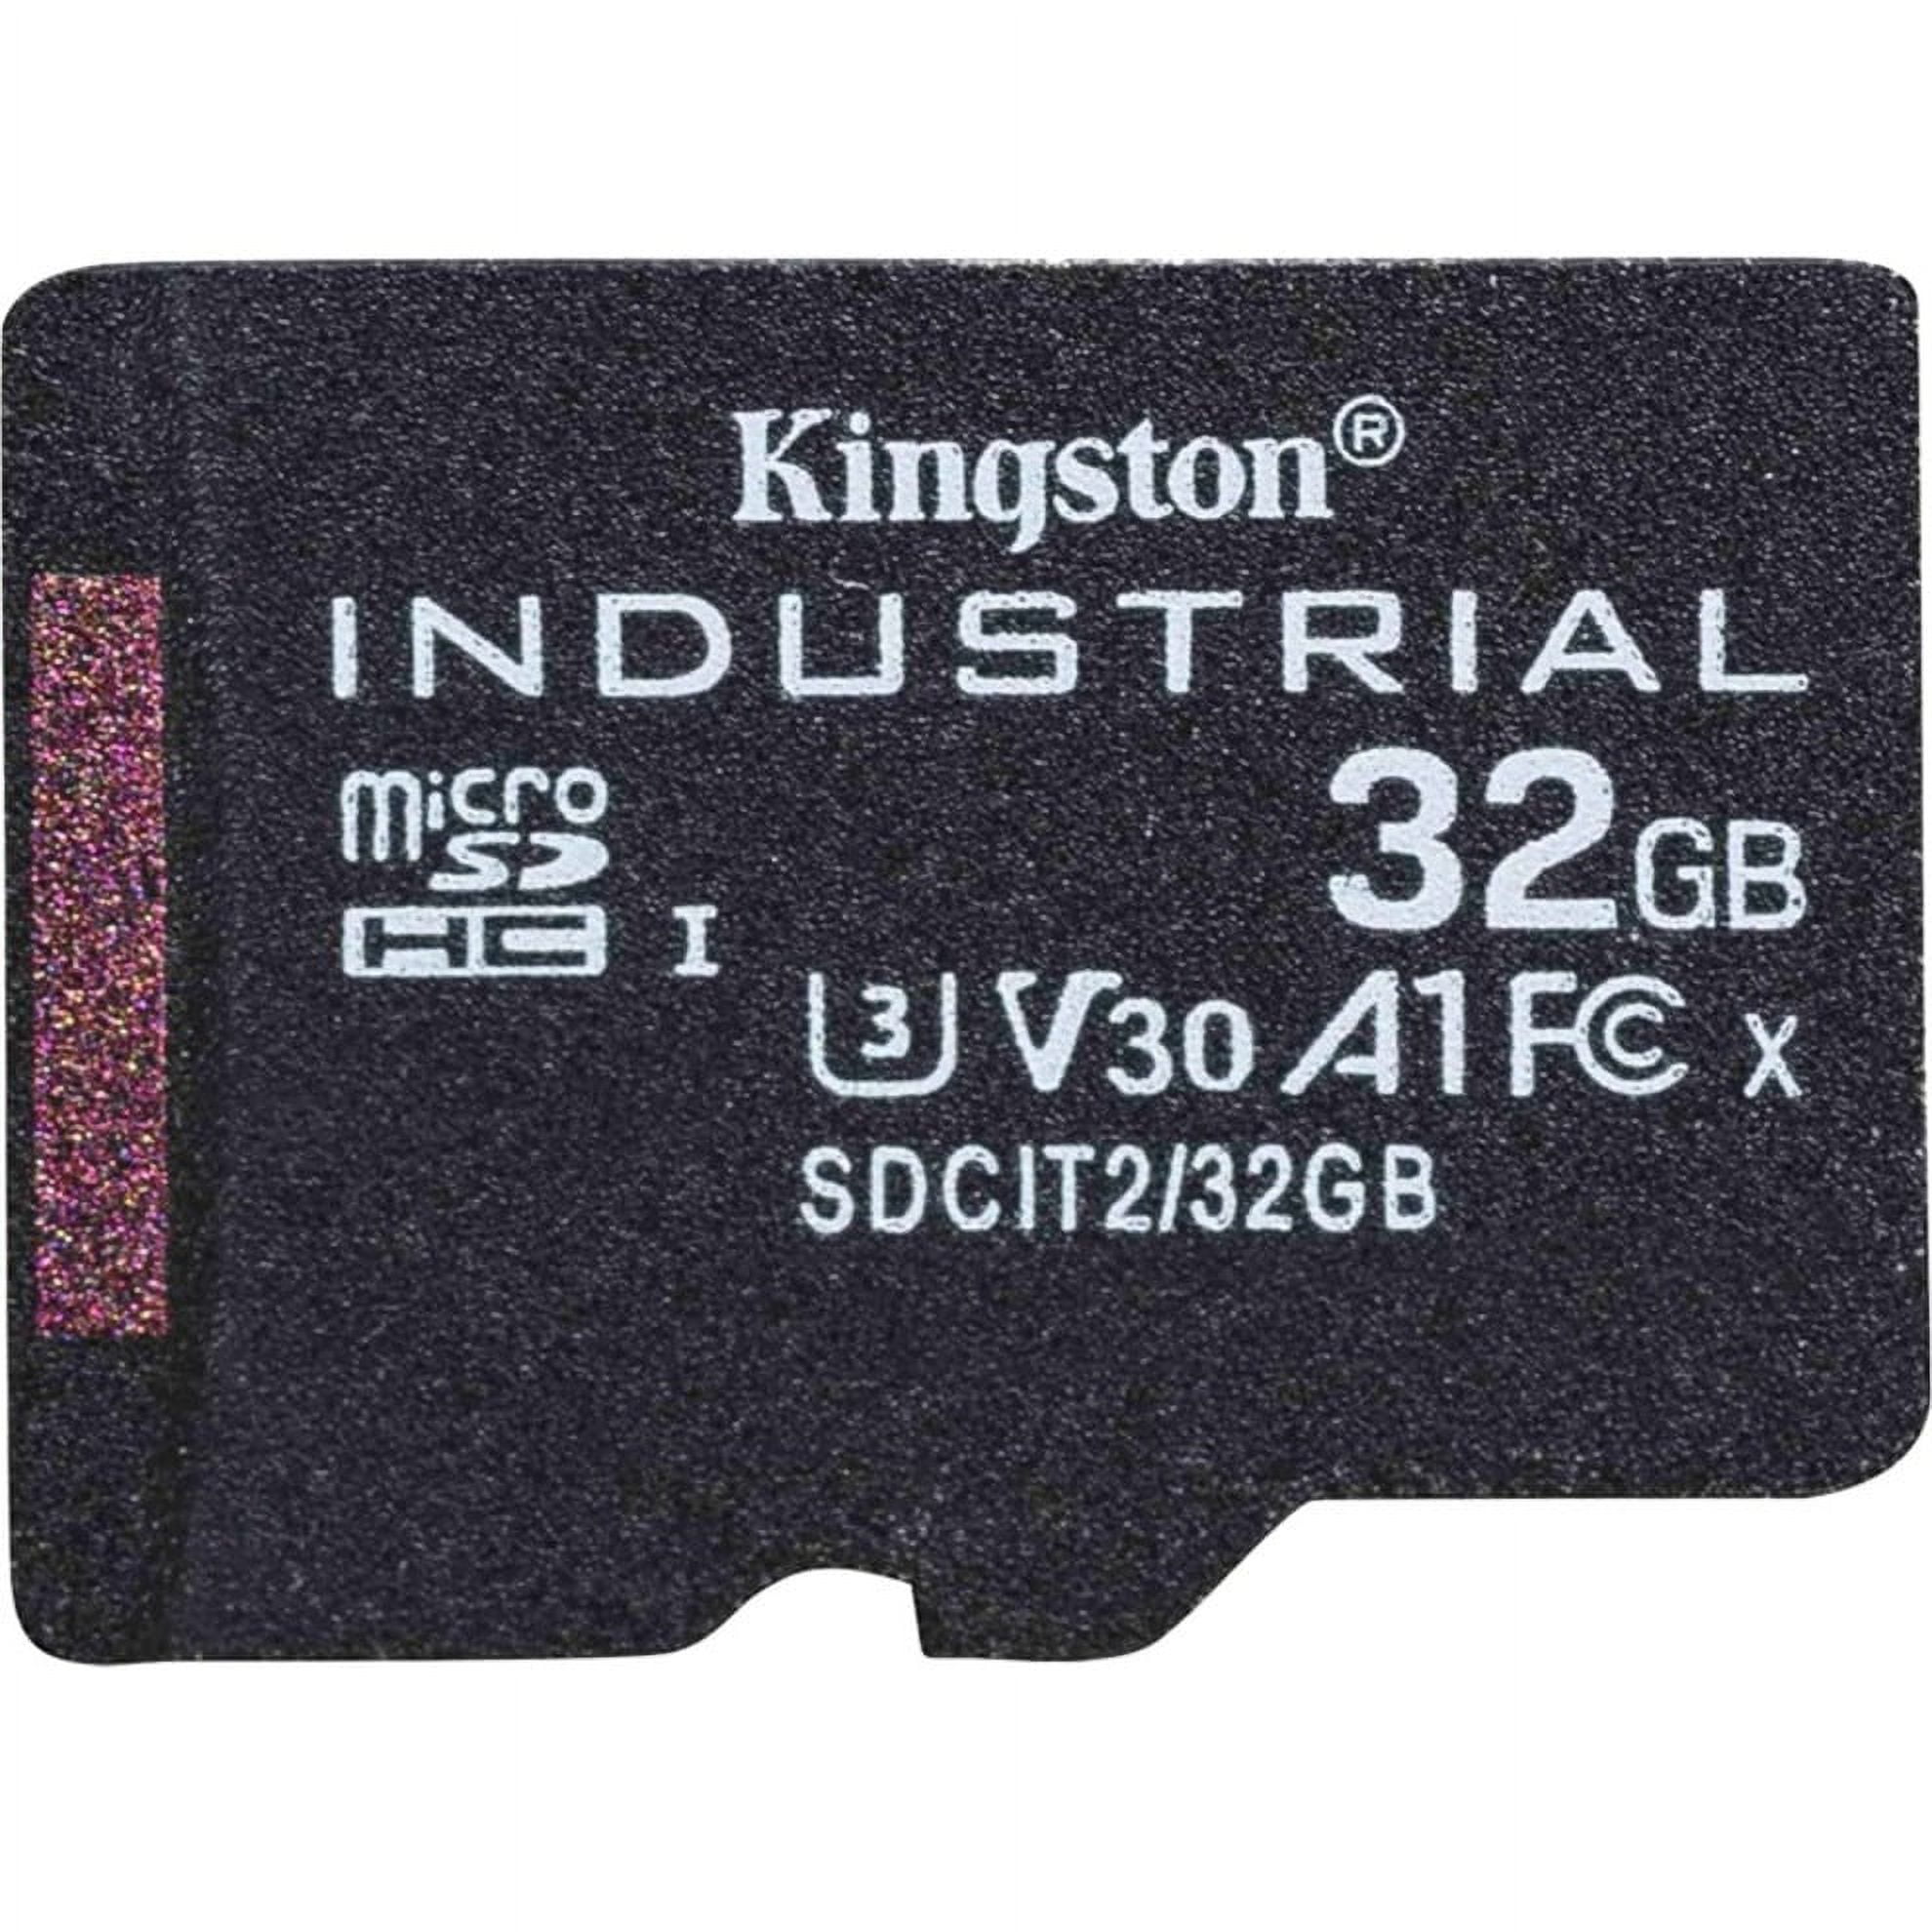 Kingston Carte Mémoire 32Go micro SDHC Classe 10 UHS-I - Zone Image  Valleyfield